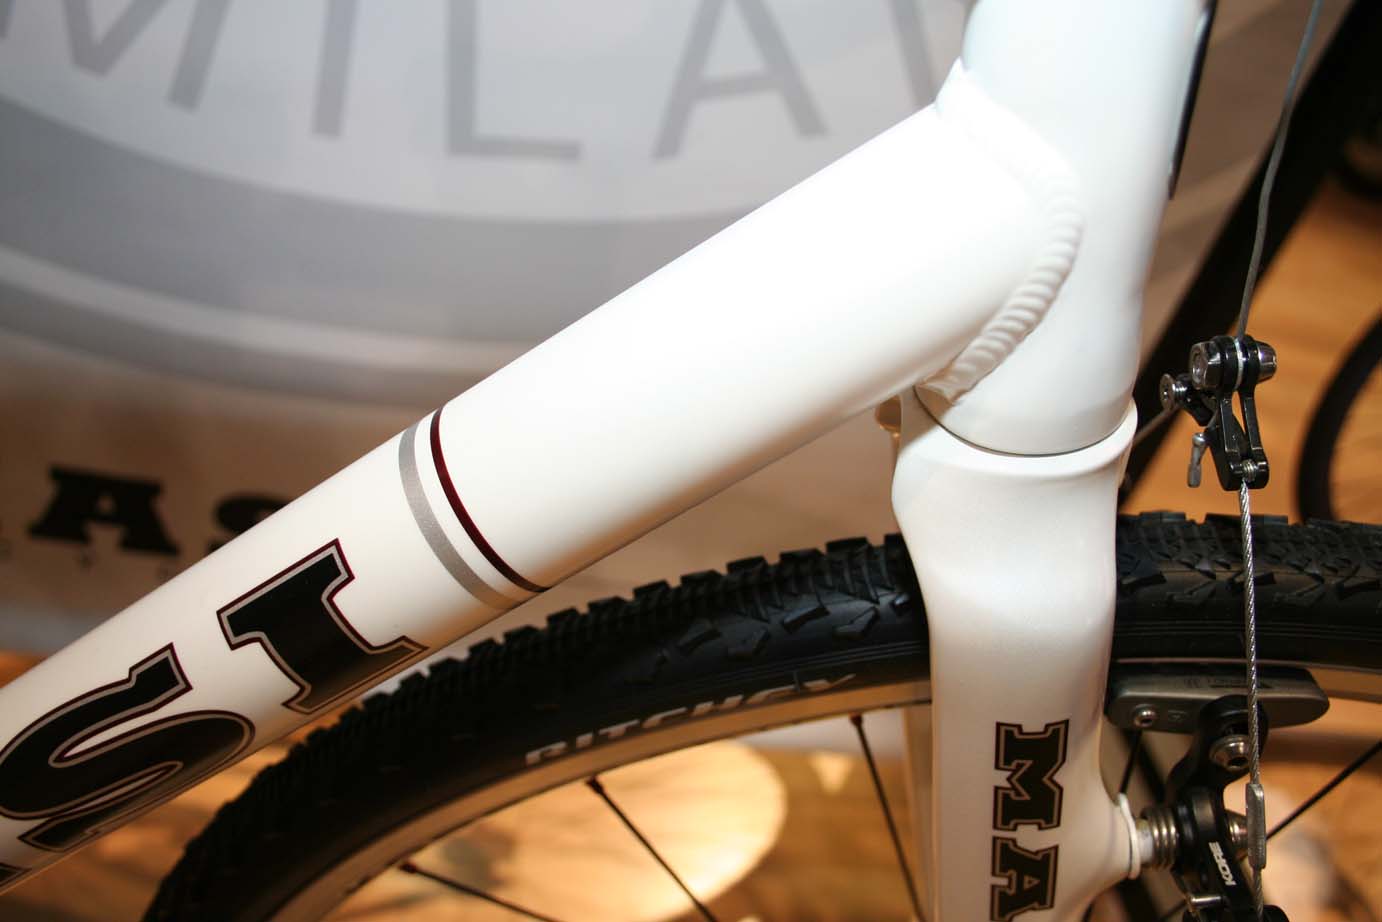 Ready for tapered head tube frames? The fork sports a curious ov